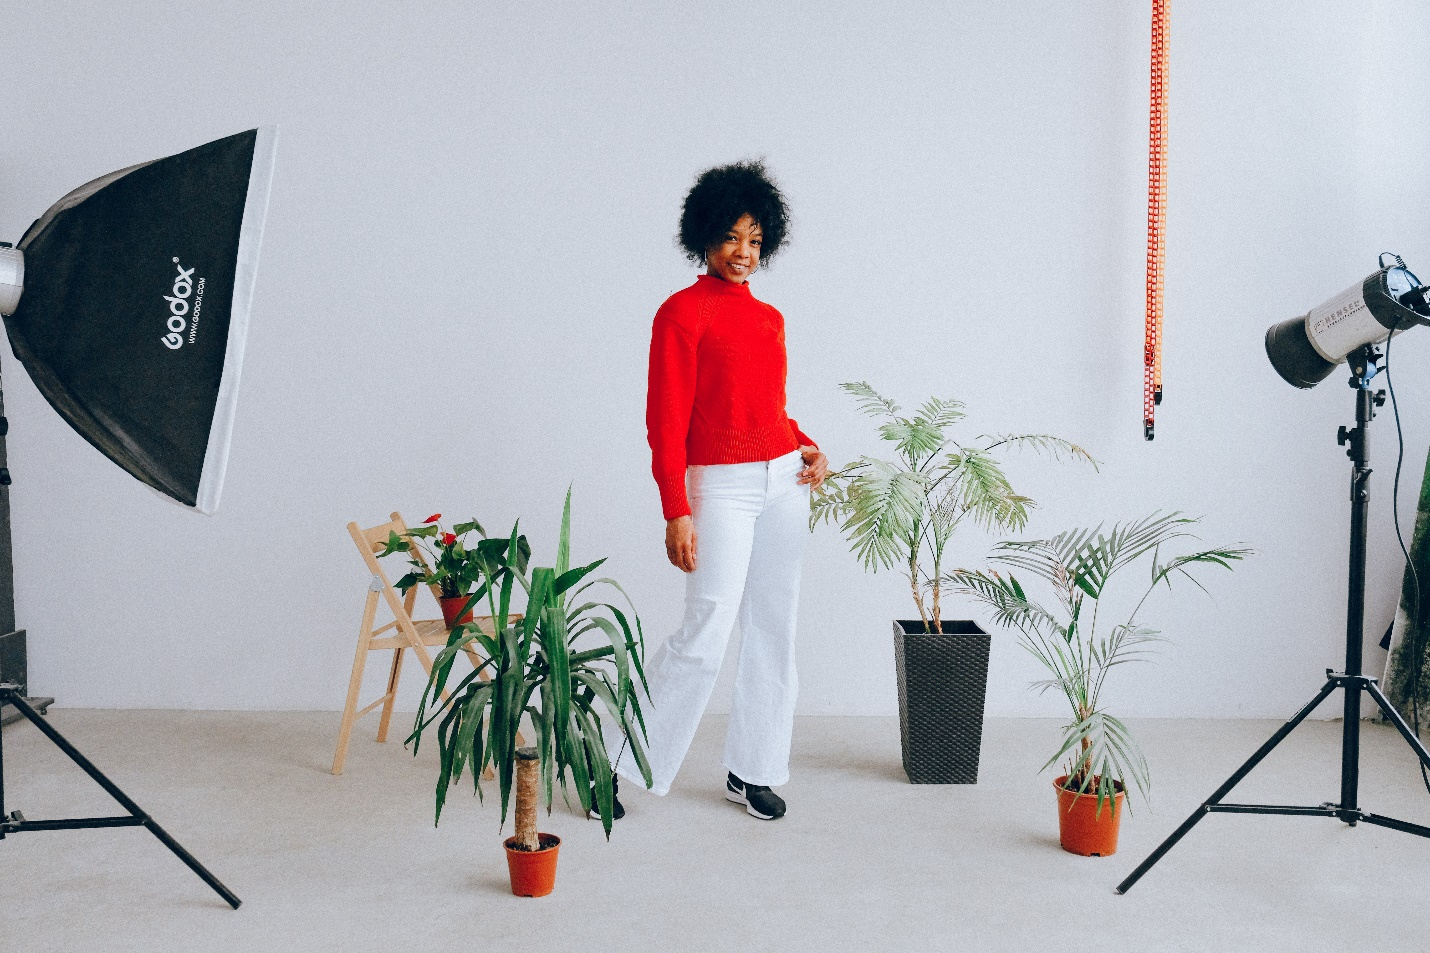 A woman in a red top and white pants stands surrounded by potted plants and studio lights against a white background in a studio